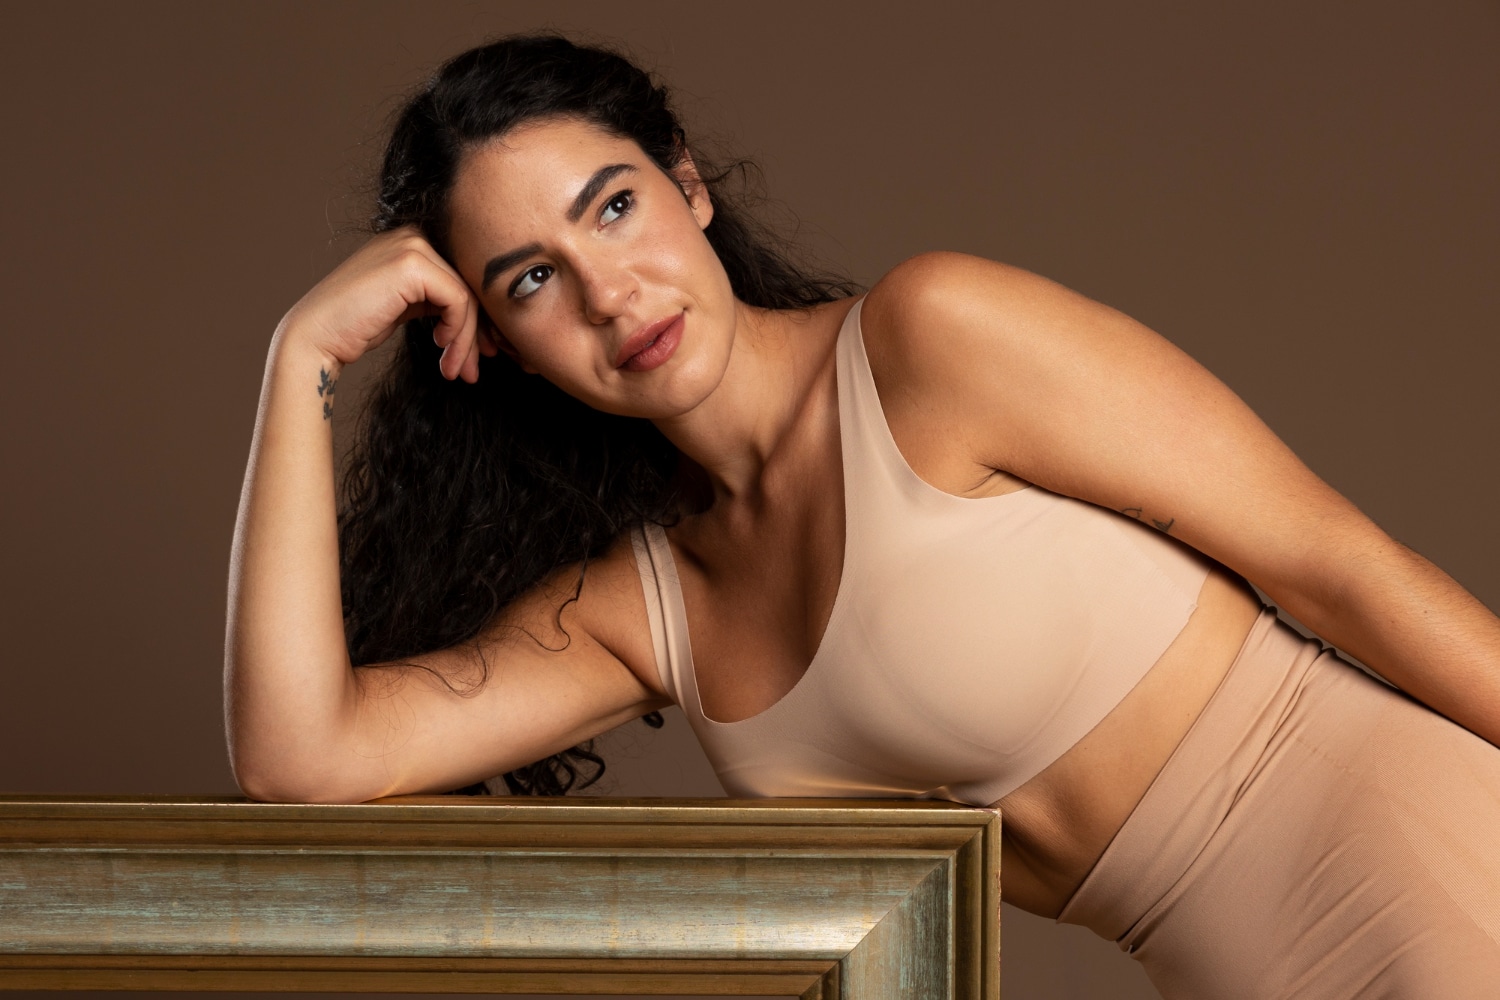 Feel Confident And Beautiful With Triumph’s Lingerie And Shapewear